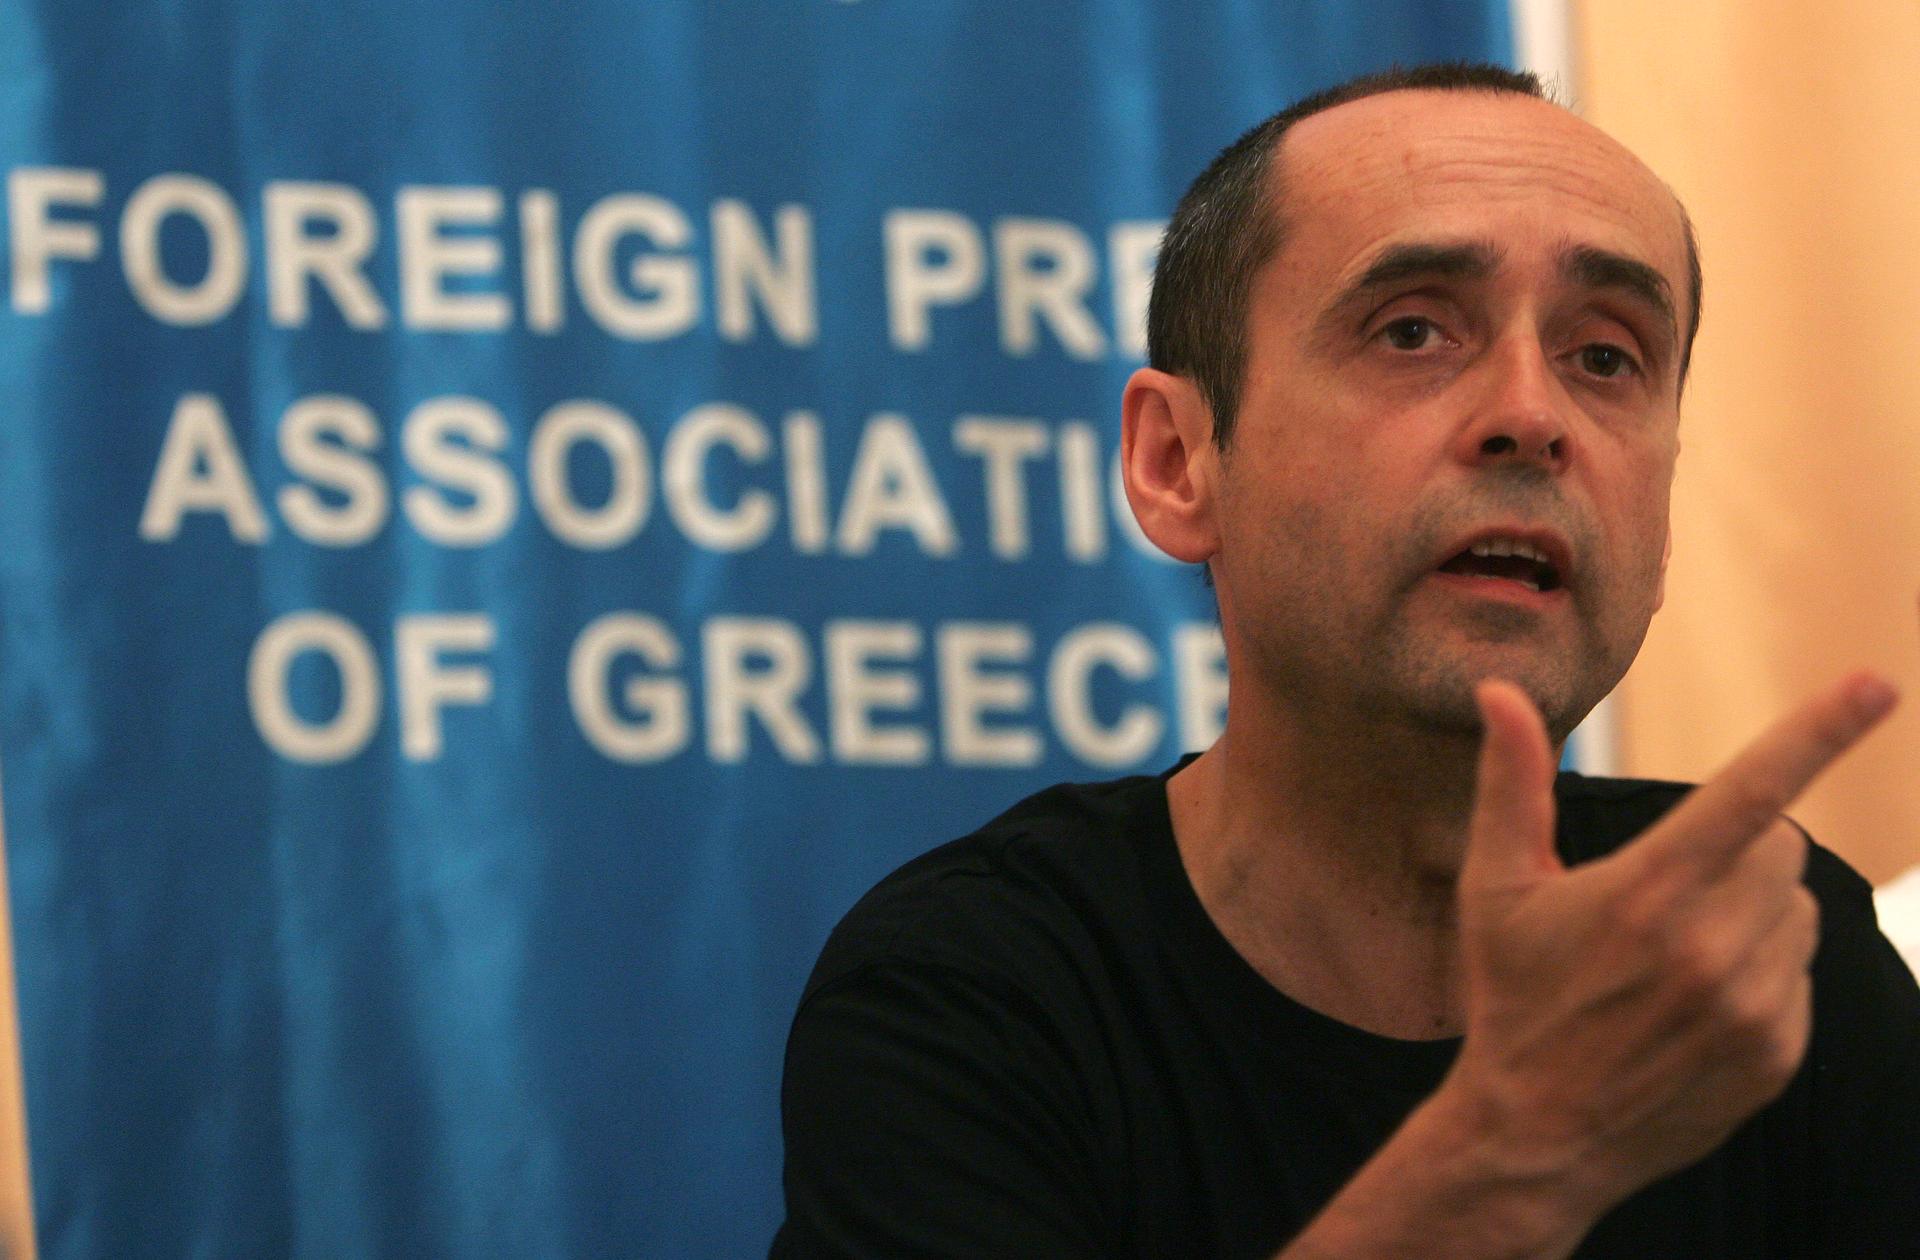 Robert Menard, a journalist from the group Reporters without Borders, speaks at a news conference in Athens May 29, 2008.